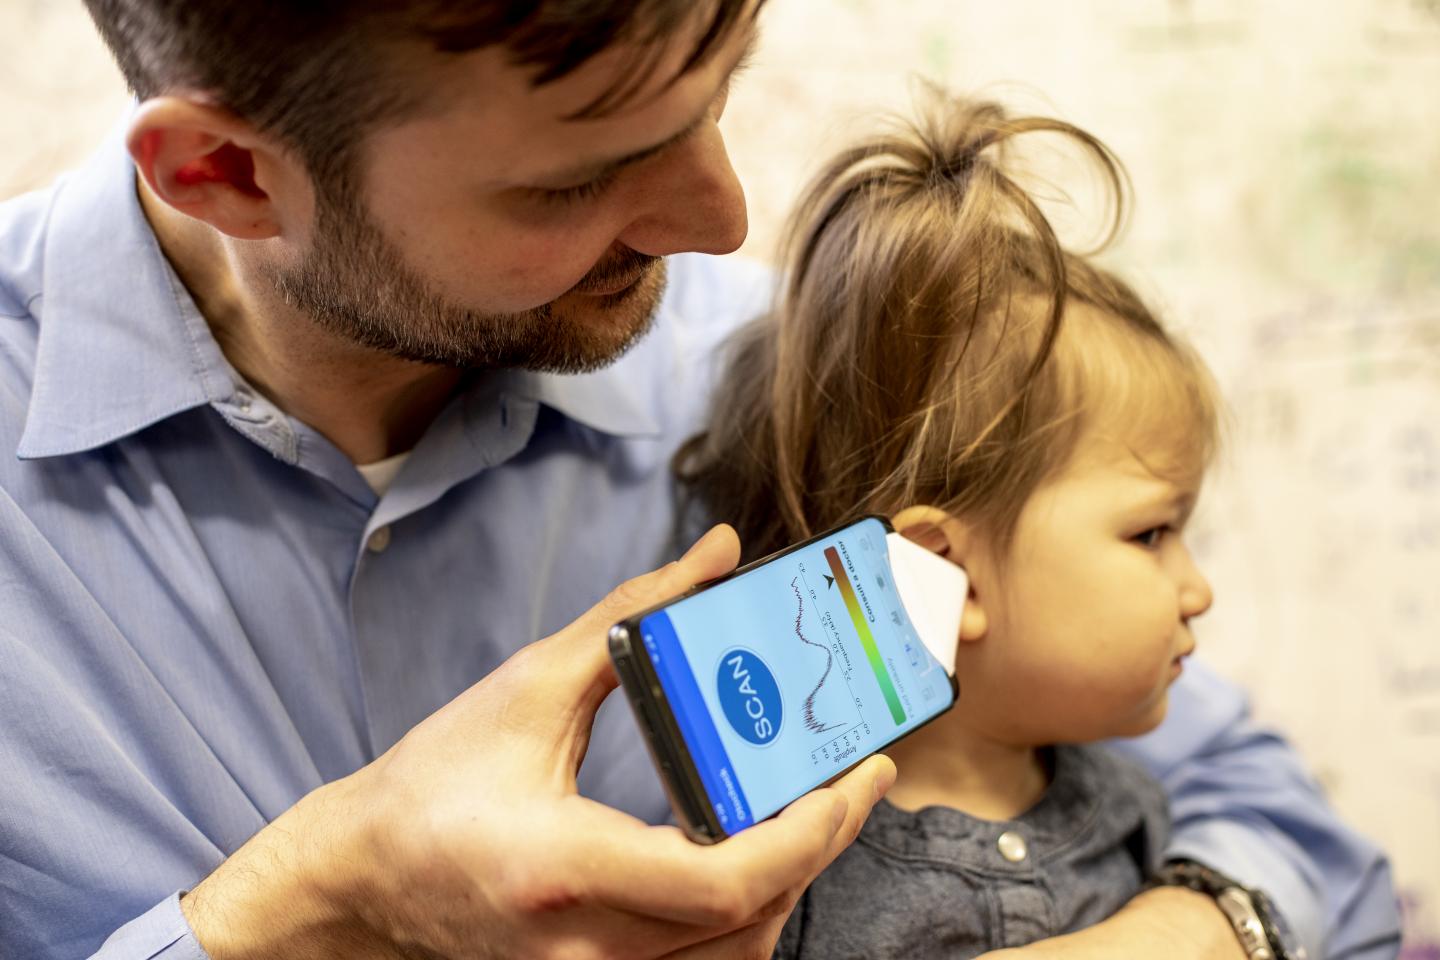 Smartphone App Can Hear Ear Infections In Children